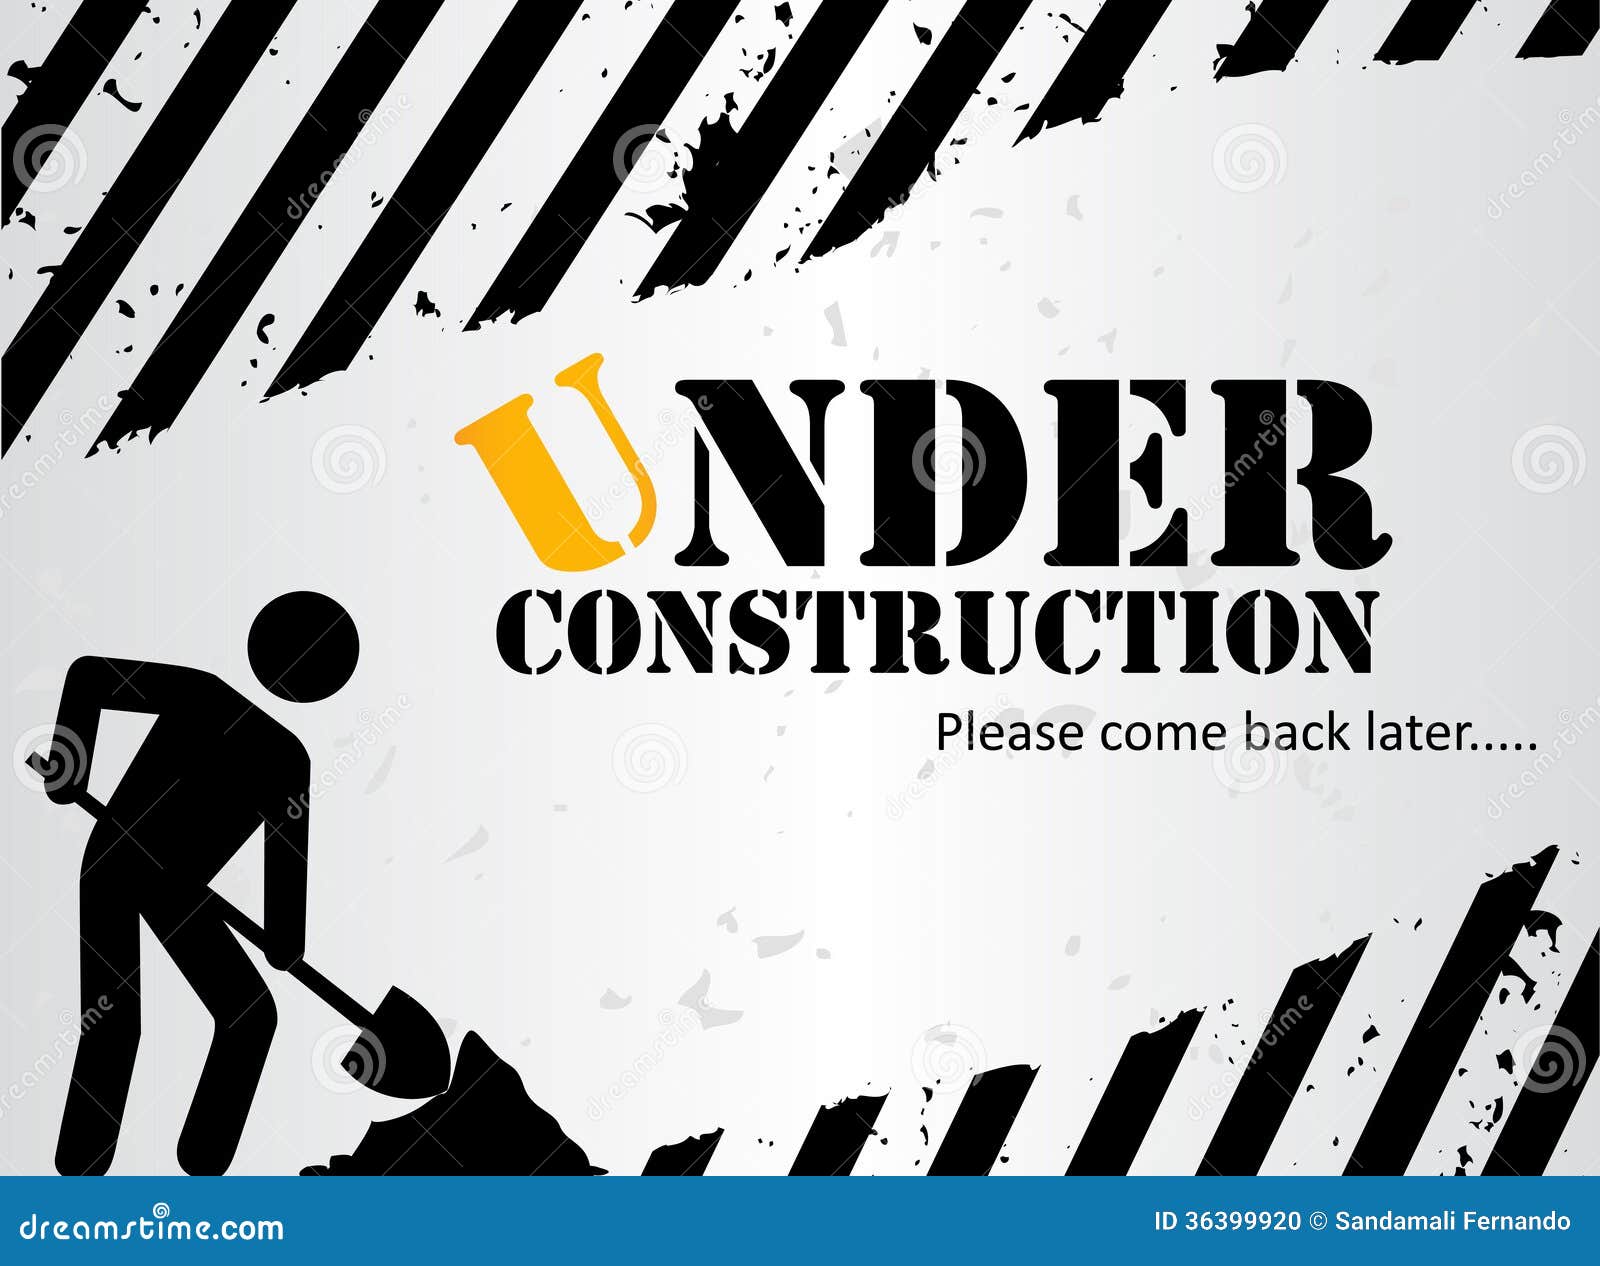 animated under construction clipart - photo #34